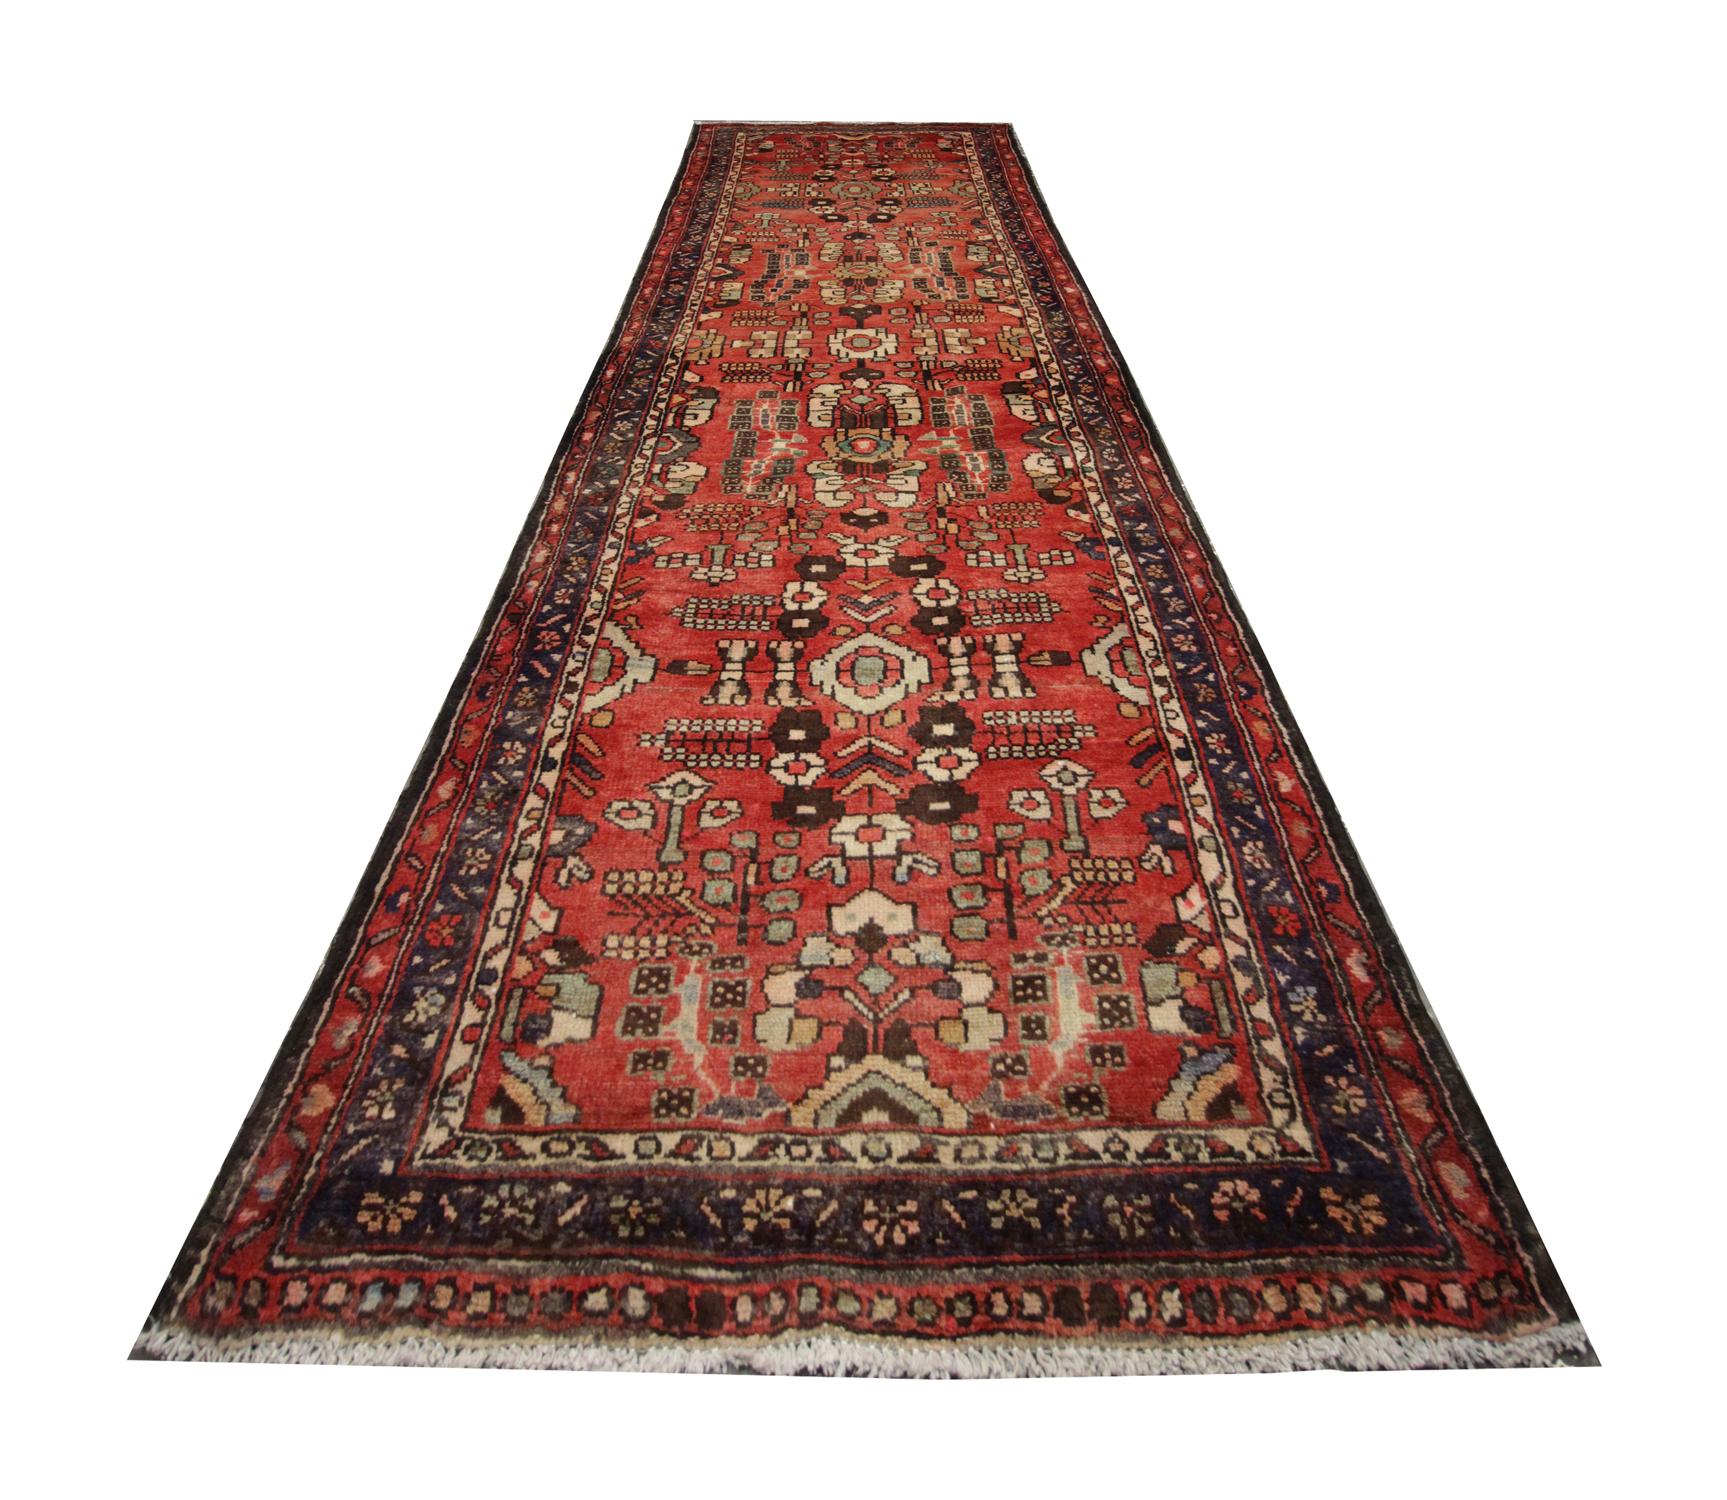 Handmade carpet Oriental rug in and bold yet harmonious colours of brown, red and cream with a geometric central design that features a repeat pattern of intricate shapes in a mixture of muted colours. This antique runner was handwoven in the 1950s